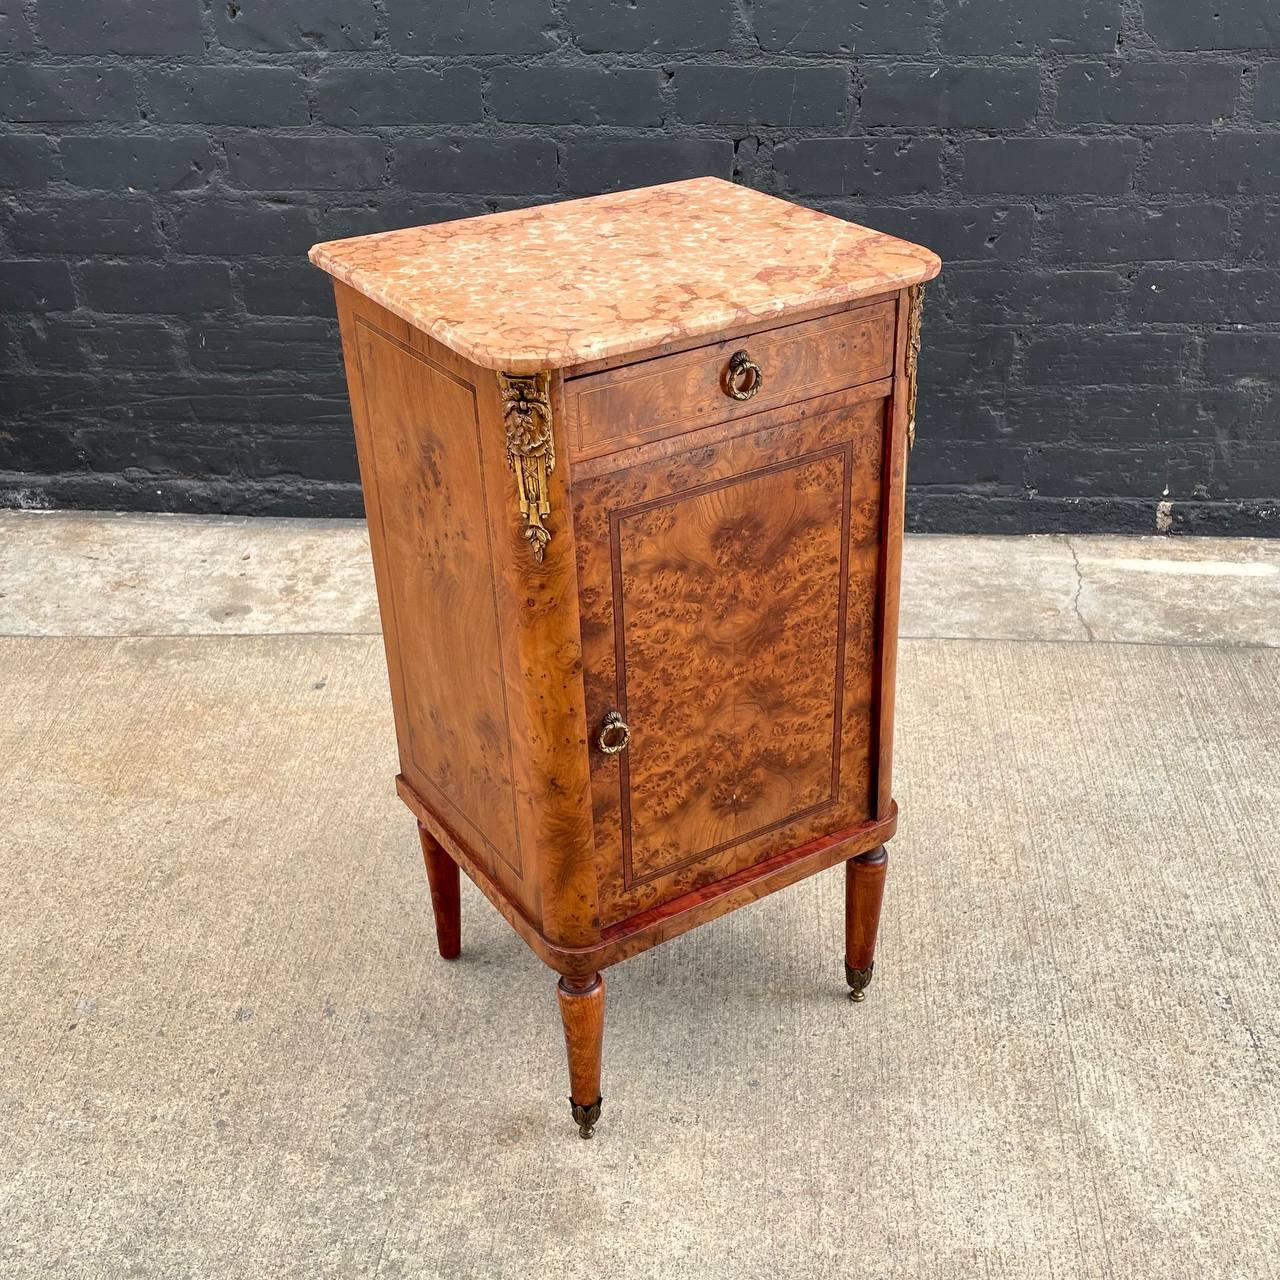 Antique French Louis XVI Night Stand with Pink Marble Top

Country: France 
Materials: Burl Wood, Original Pink Marble
Condition: Original Vintage Condition
Style: French Louis XVI
Year: 1920’s

$1,250 

Dimensions 
32”H x 17”W x 14.50”D